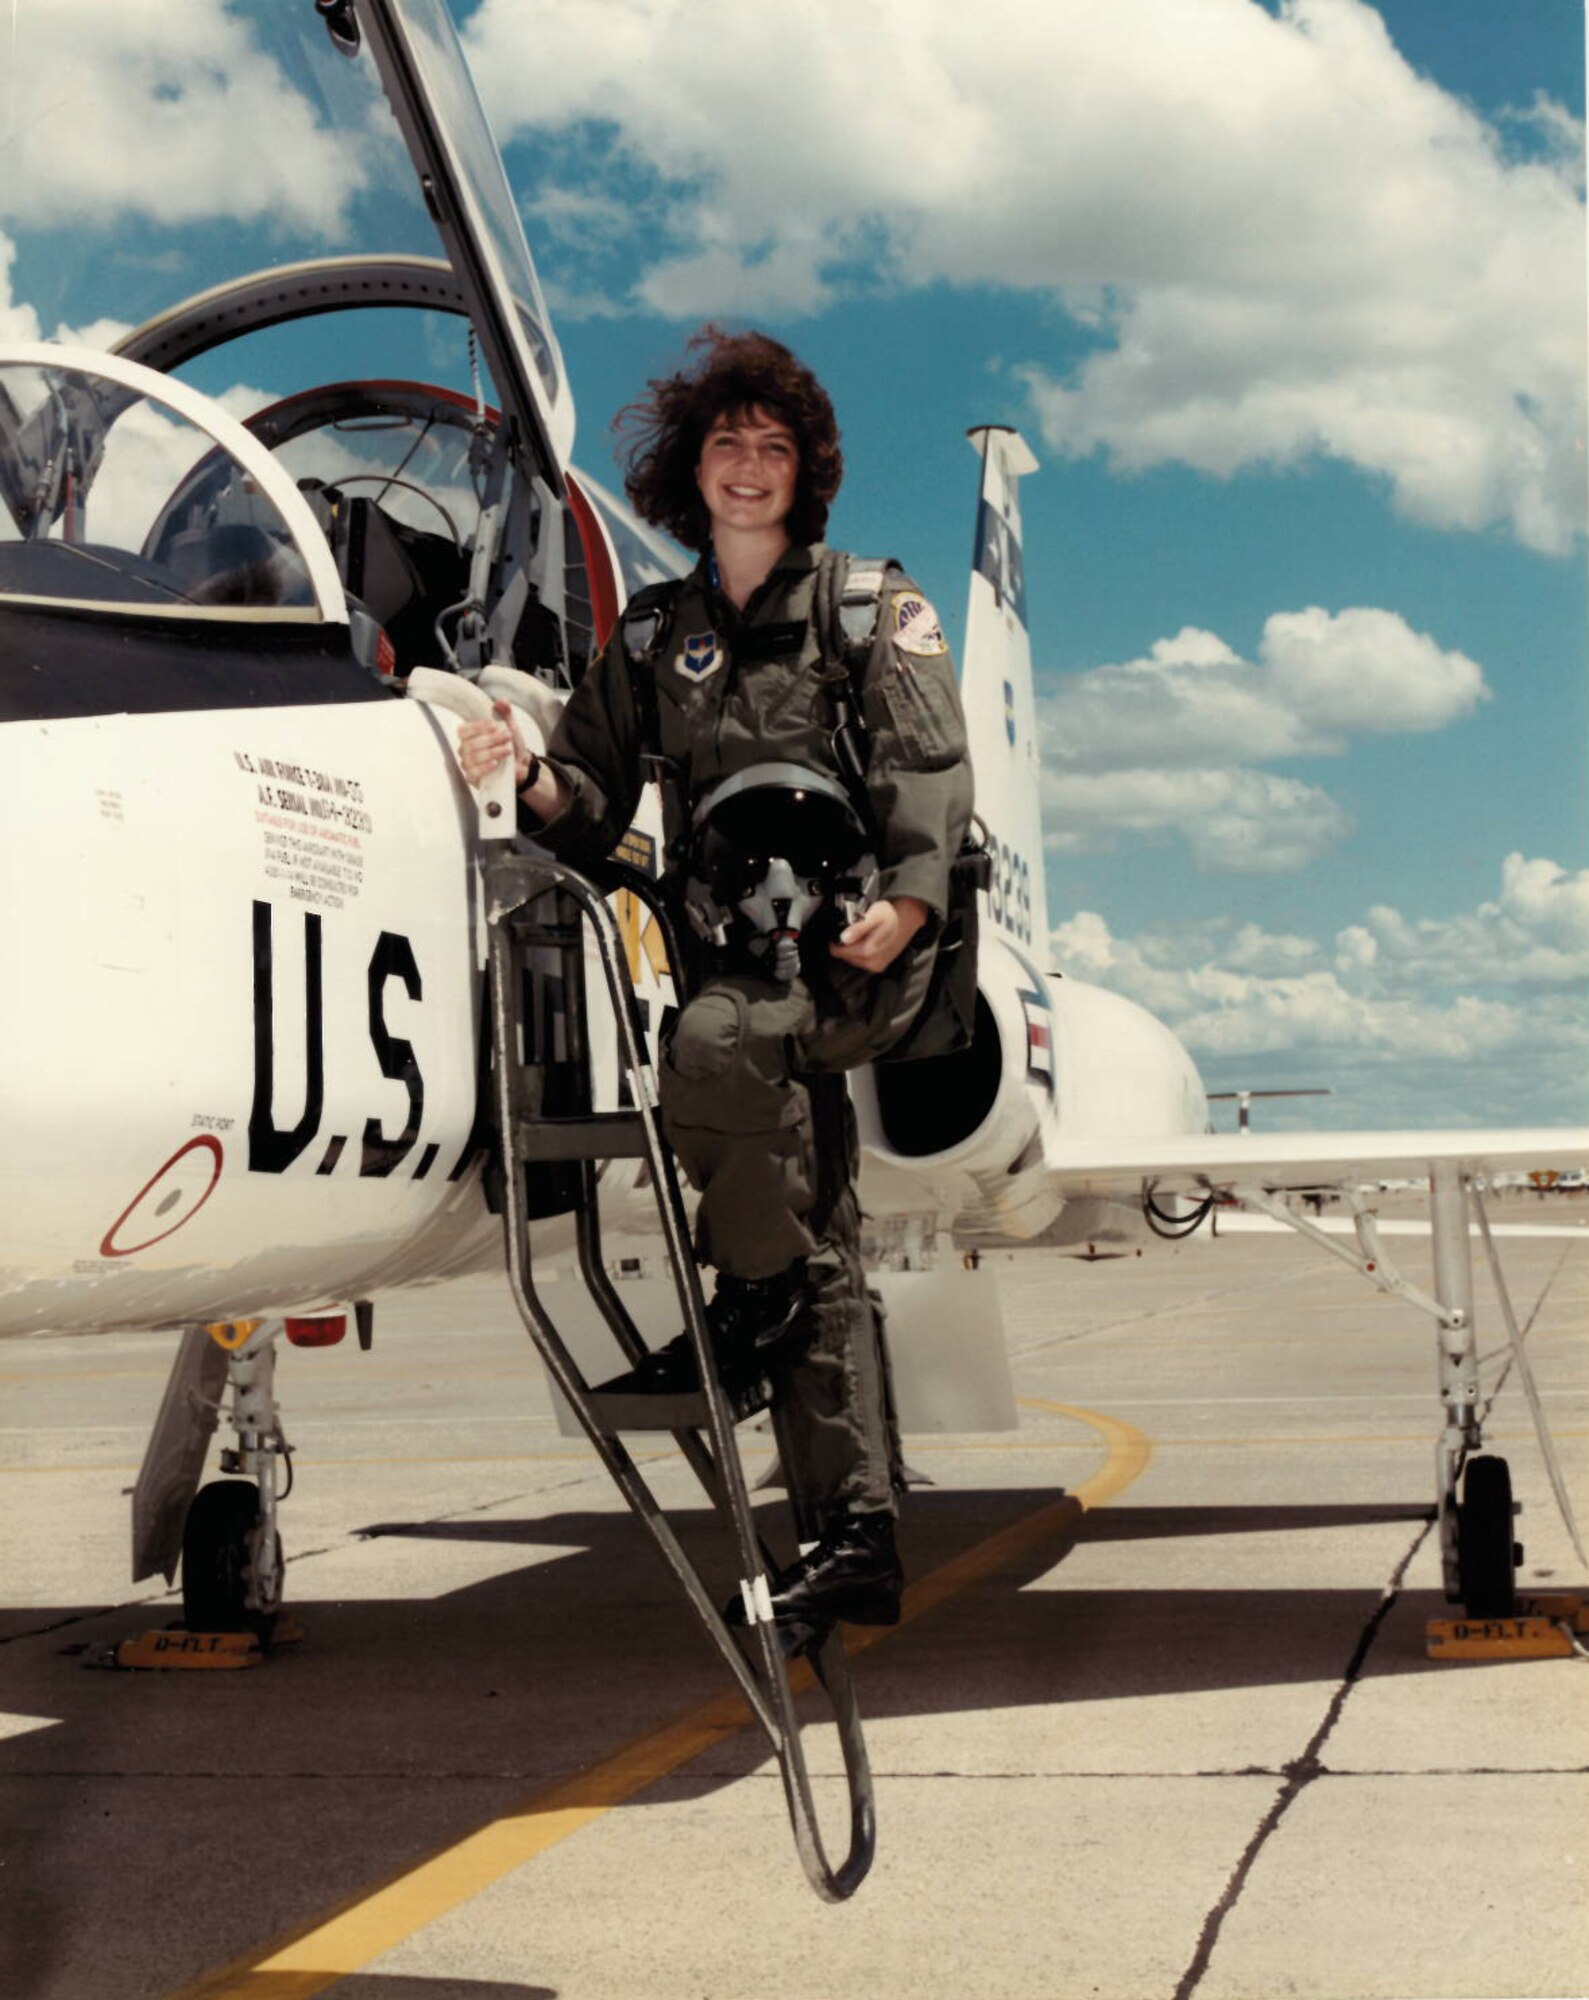 Col. Robyn Slade, 50th Space Wing senior individual mobilization augmentee to the commander, stands proudly with the t-38 she flew she flew at initial pilot training. Slade began her Air Force career within Public Affairs, but was able to pursue her dream of flying after years of hard work. (Courtesy photo)